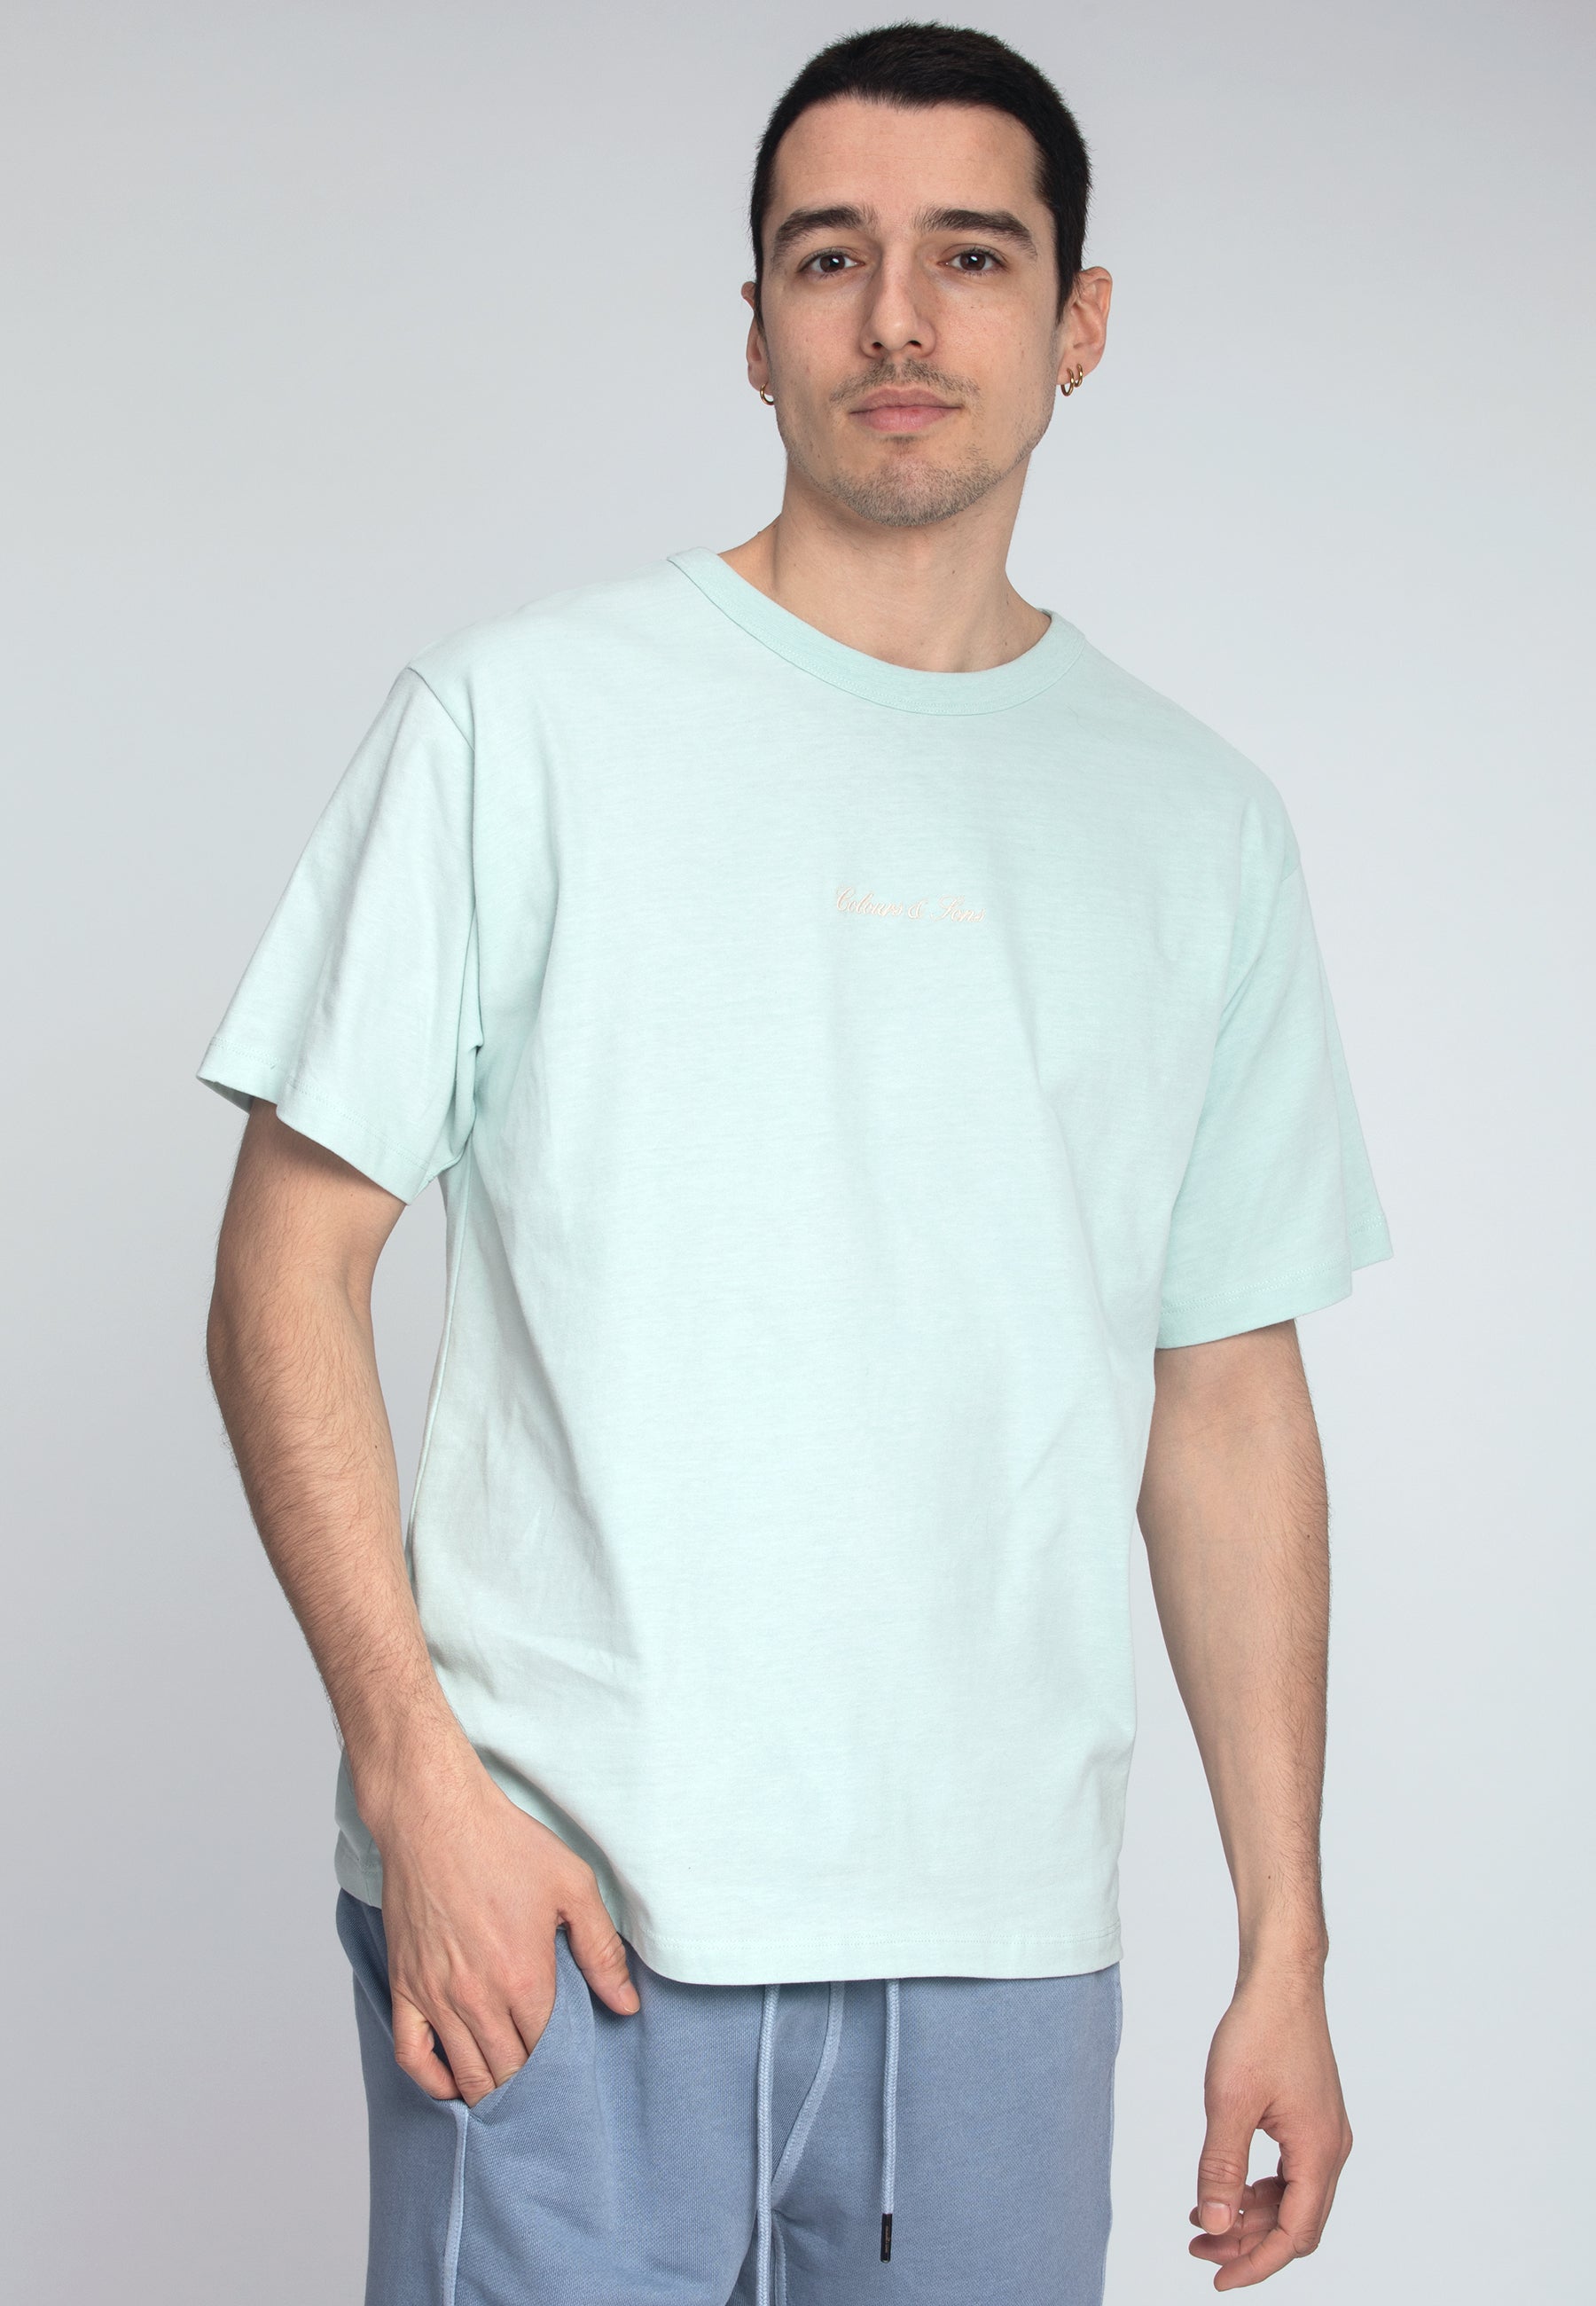 T-Shirt Basic Embroidery in Mist T-Shirts Colours and Sons   